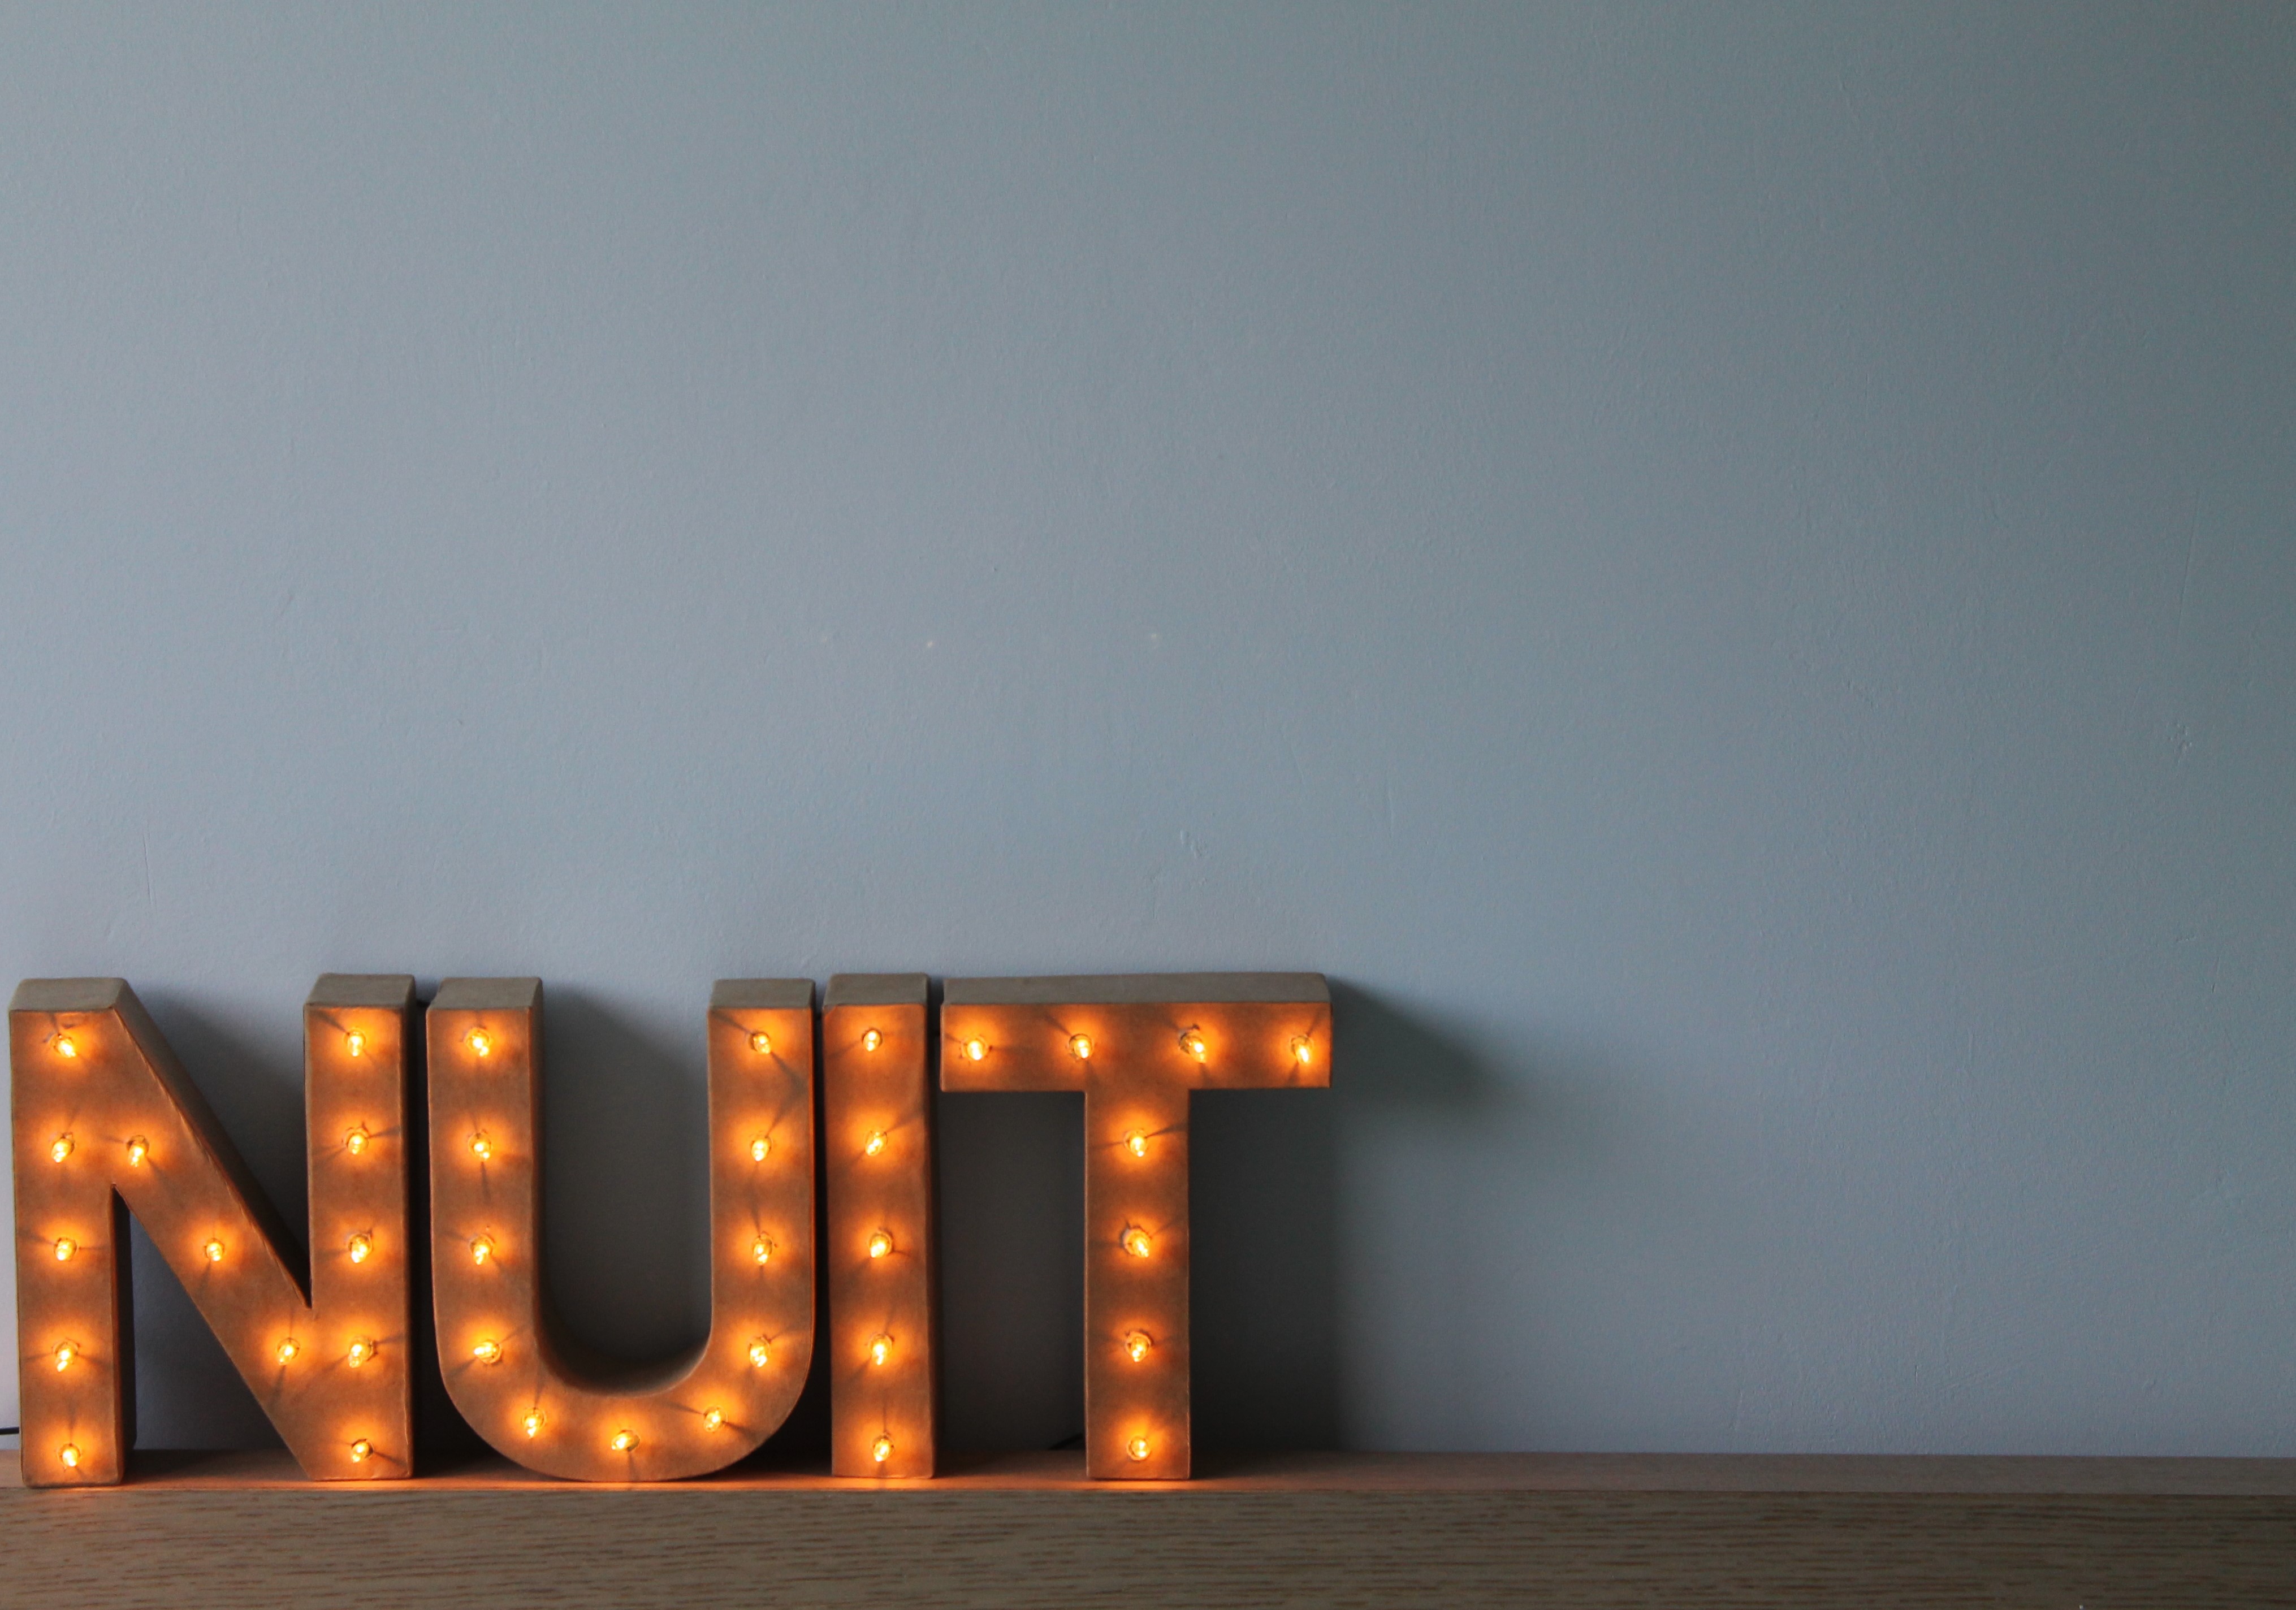 DIY: Marquee letters inspired lamp | Marquee letters are a big trend right now, but they can be quite costly. Here we'll show you how to make this lamp for just a few bucks - woohoo! Click through for the full description.